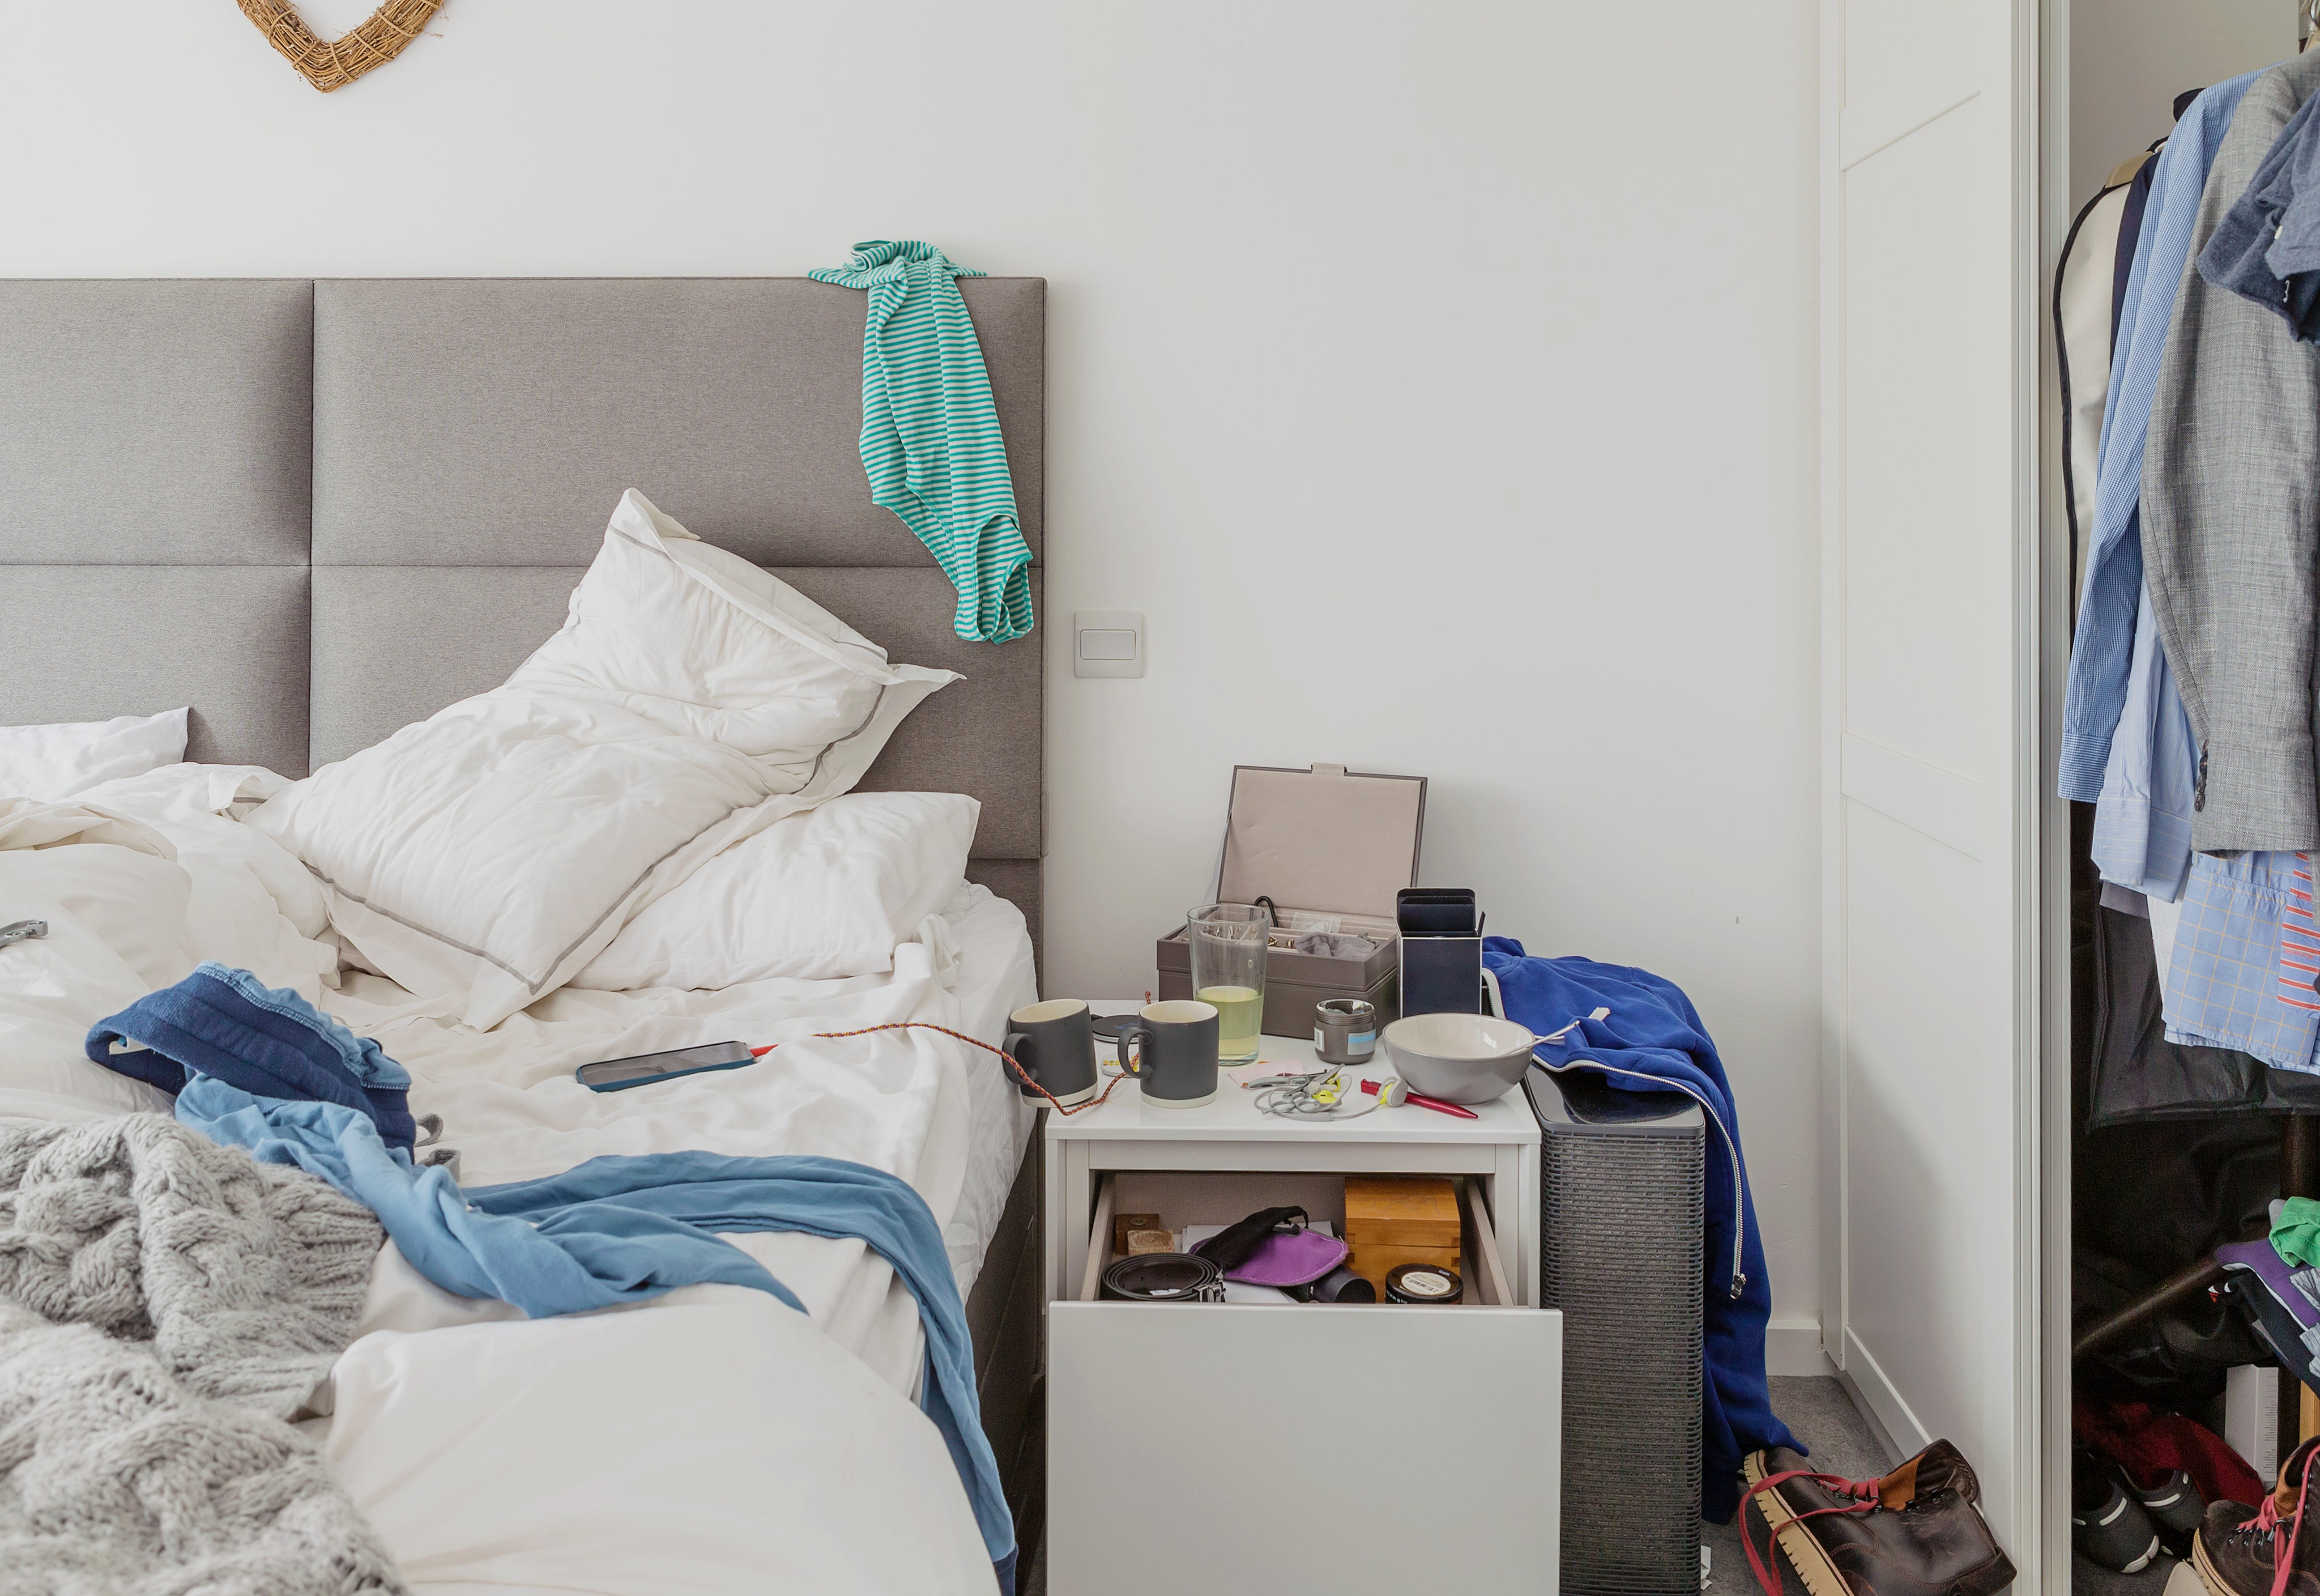 How A Lifelong Messy Person Can Learn To Become Neat By Alexandra Samuel Forge